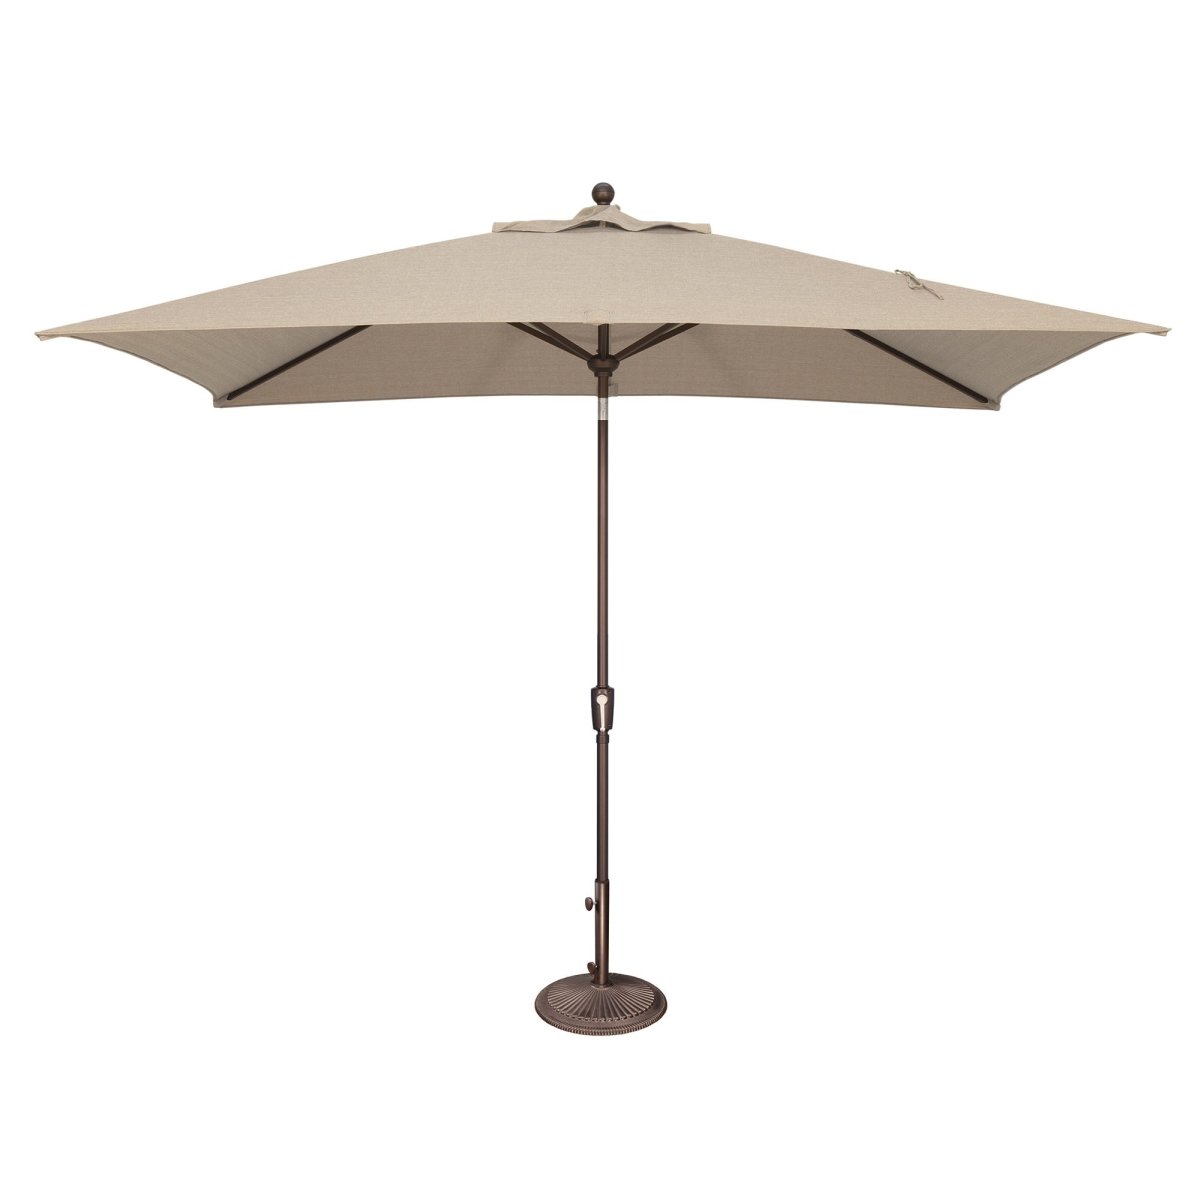 Picture of SimplyShade SSUM92-6X10RT09-D2422 6.6 x 10 ft. Catalina Rectangle Push Button Umbrella - Beige